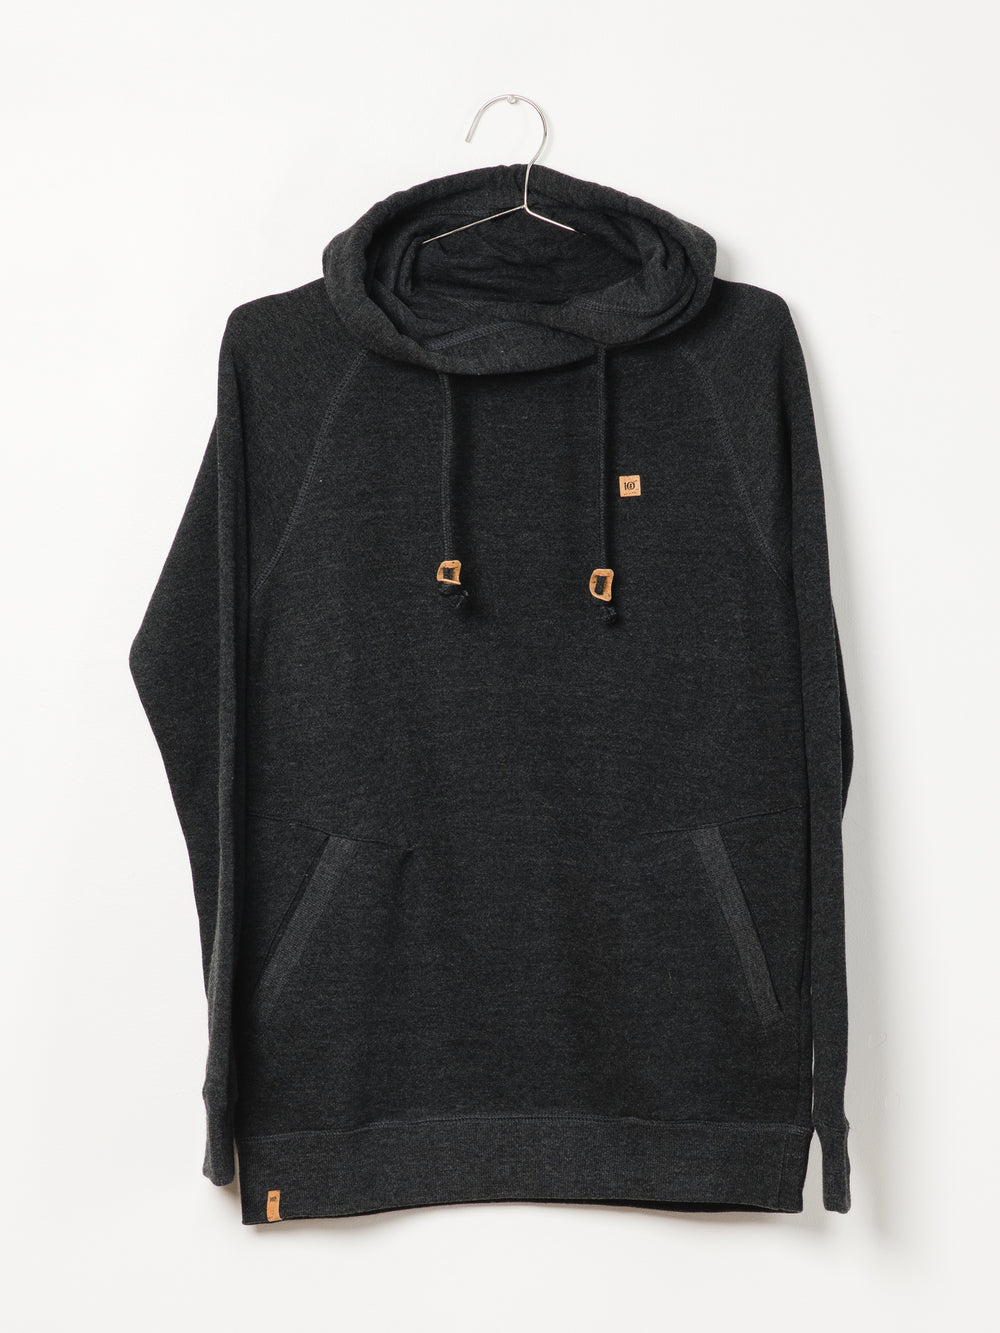 TENTREE BURNEY CORK PATCH PULLOVER HOODIE  - CLEARANCE